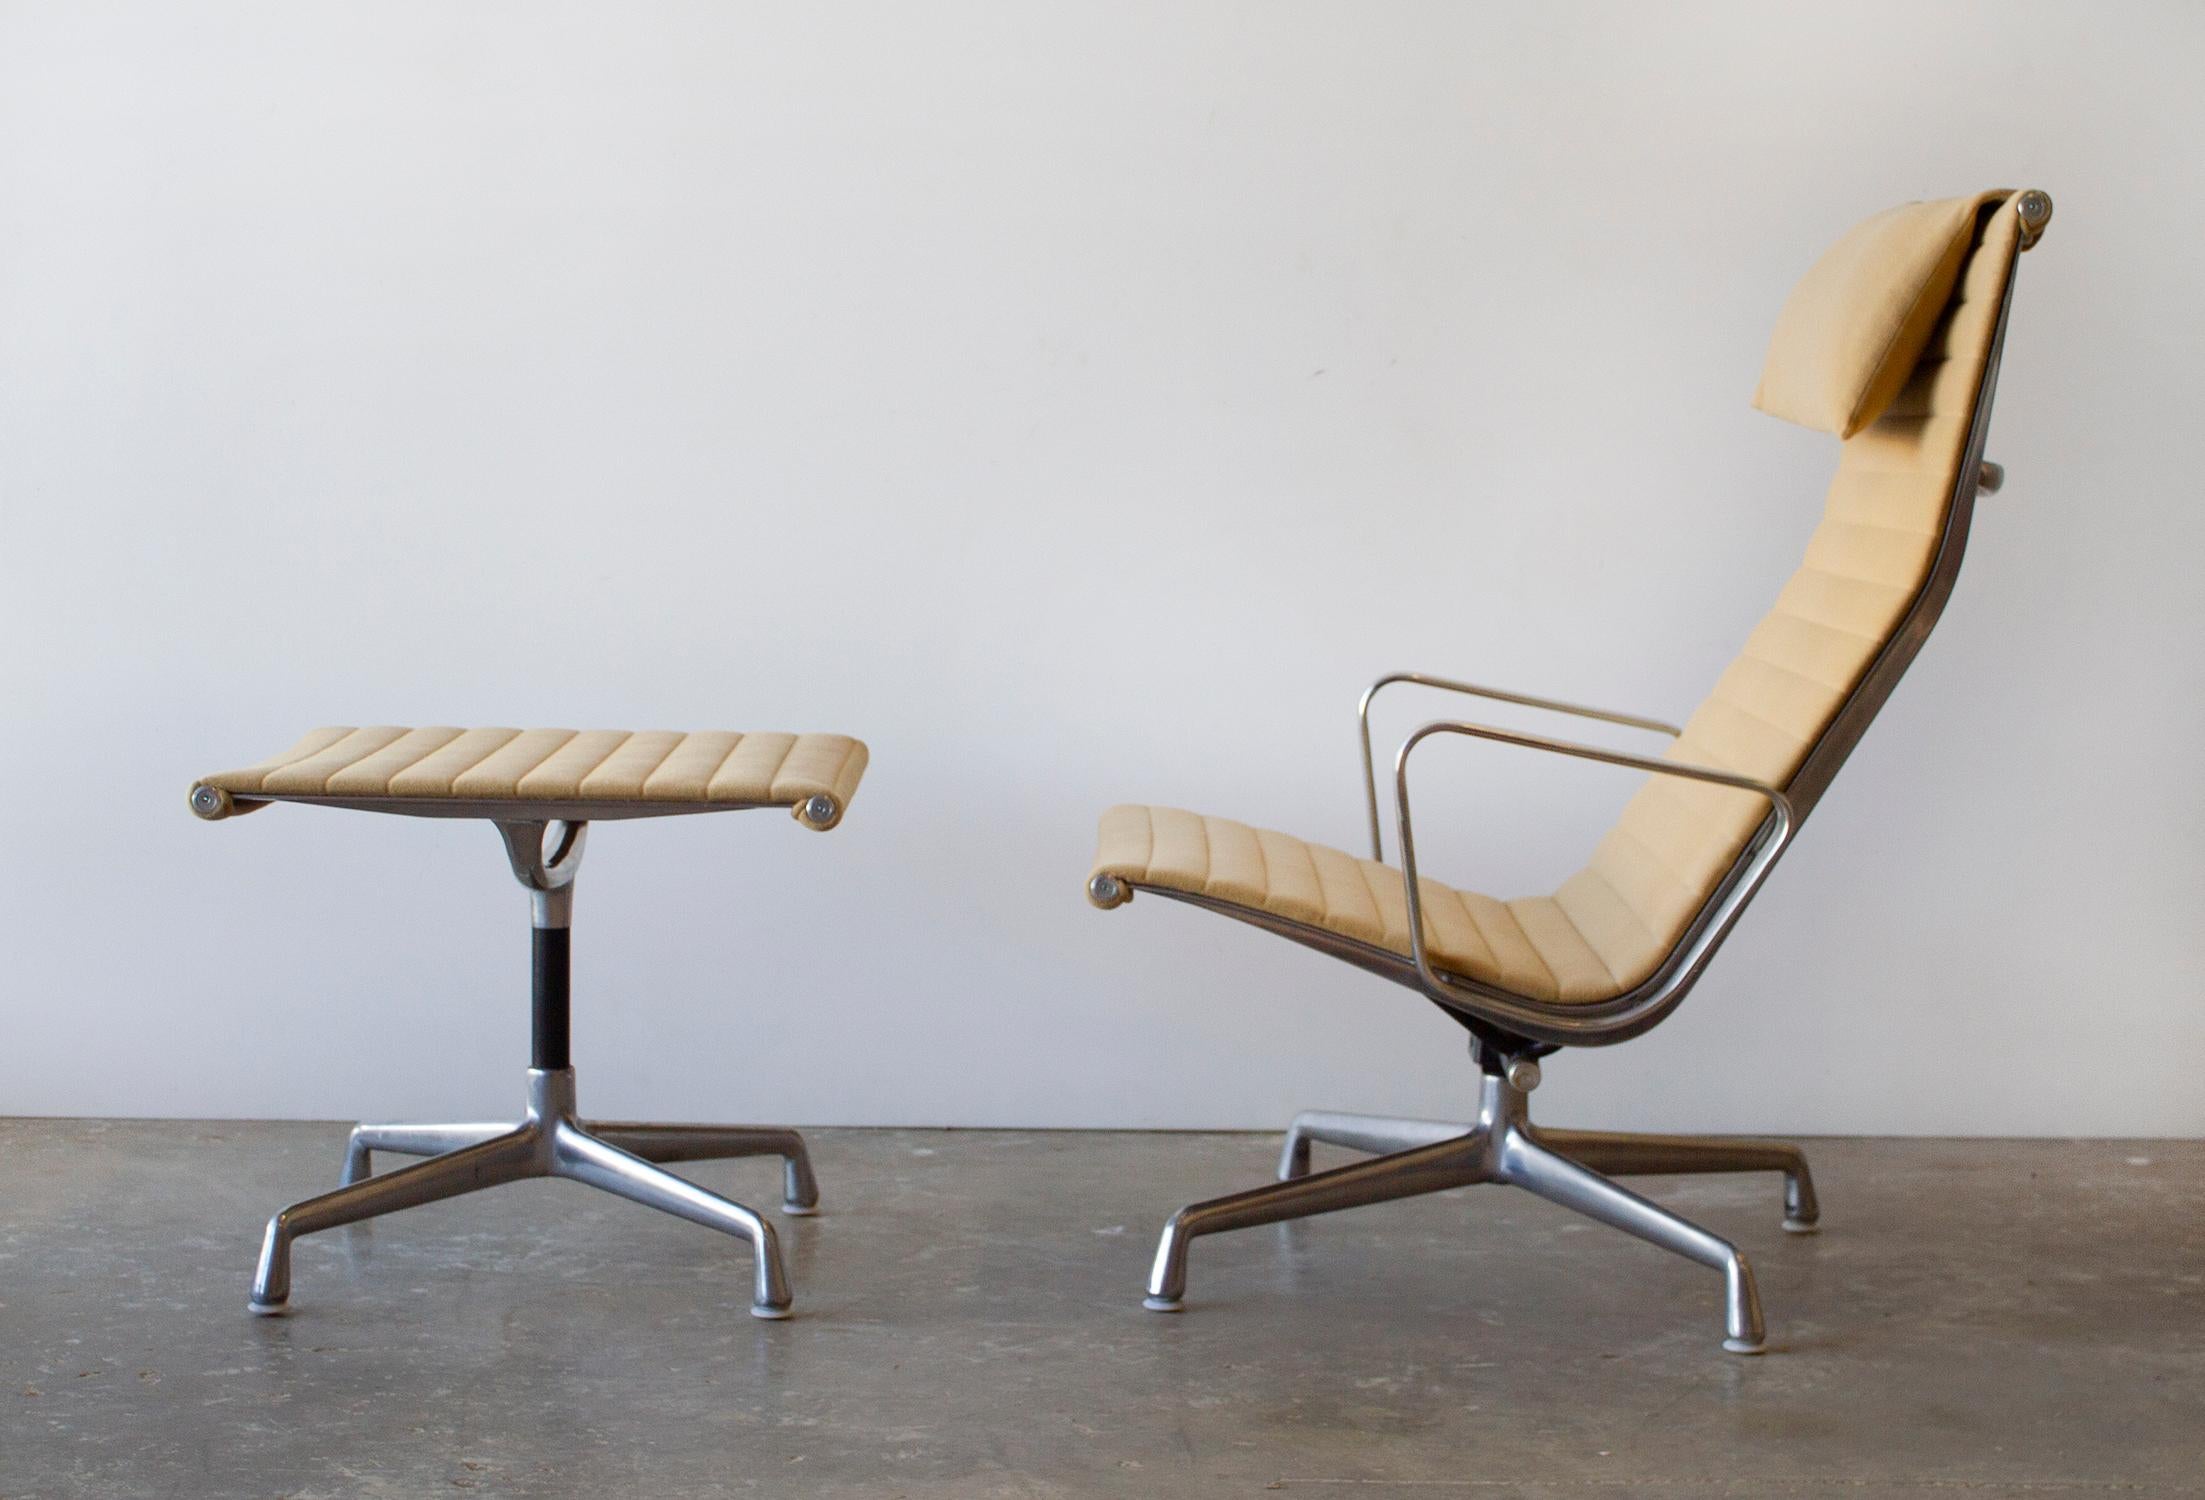 All original Charles Eames Aluminum Group lounge chair and ottoman produced by Herman Miller. This example was manufactured in the 1970s and was owned by an executive who worked for Herman Miller. Upholstered in the seldom-seen camel-colored felted